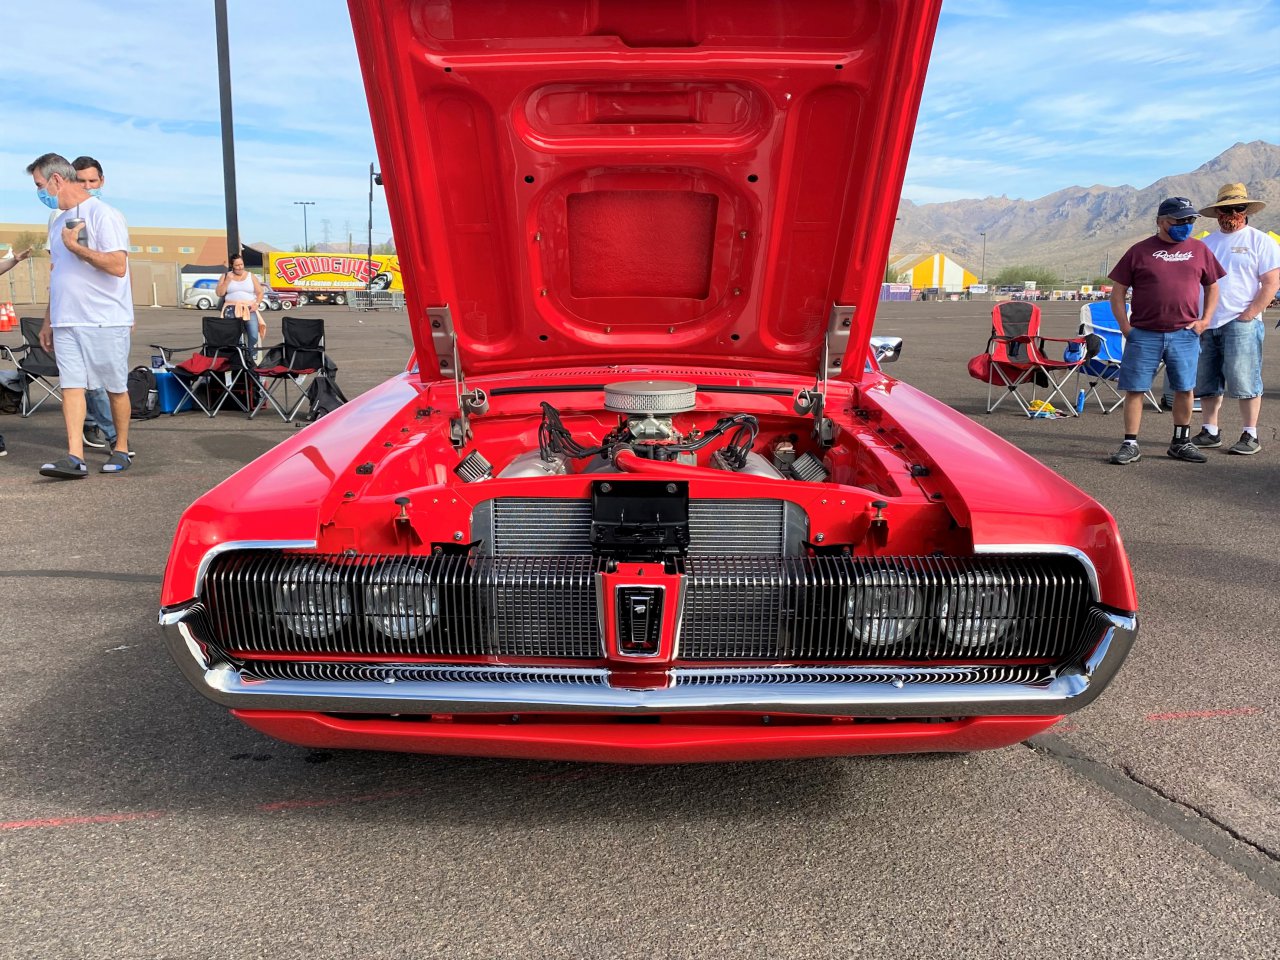 Goodguys, Goodguys cars of the year featured at Southwest Nationals, ClassicCars.com Journal